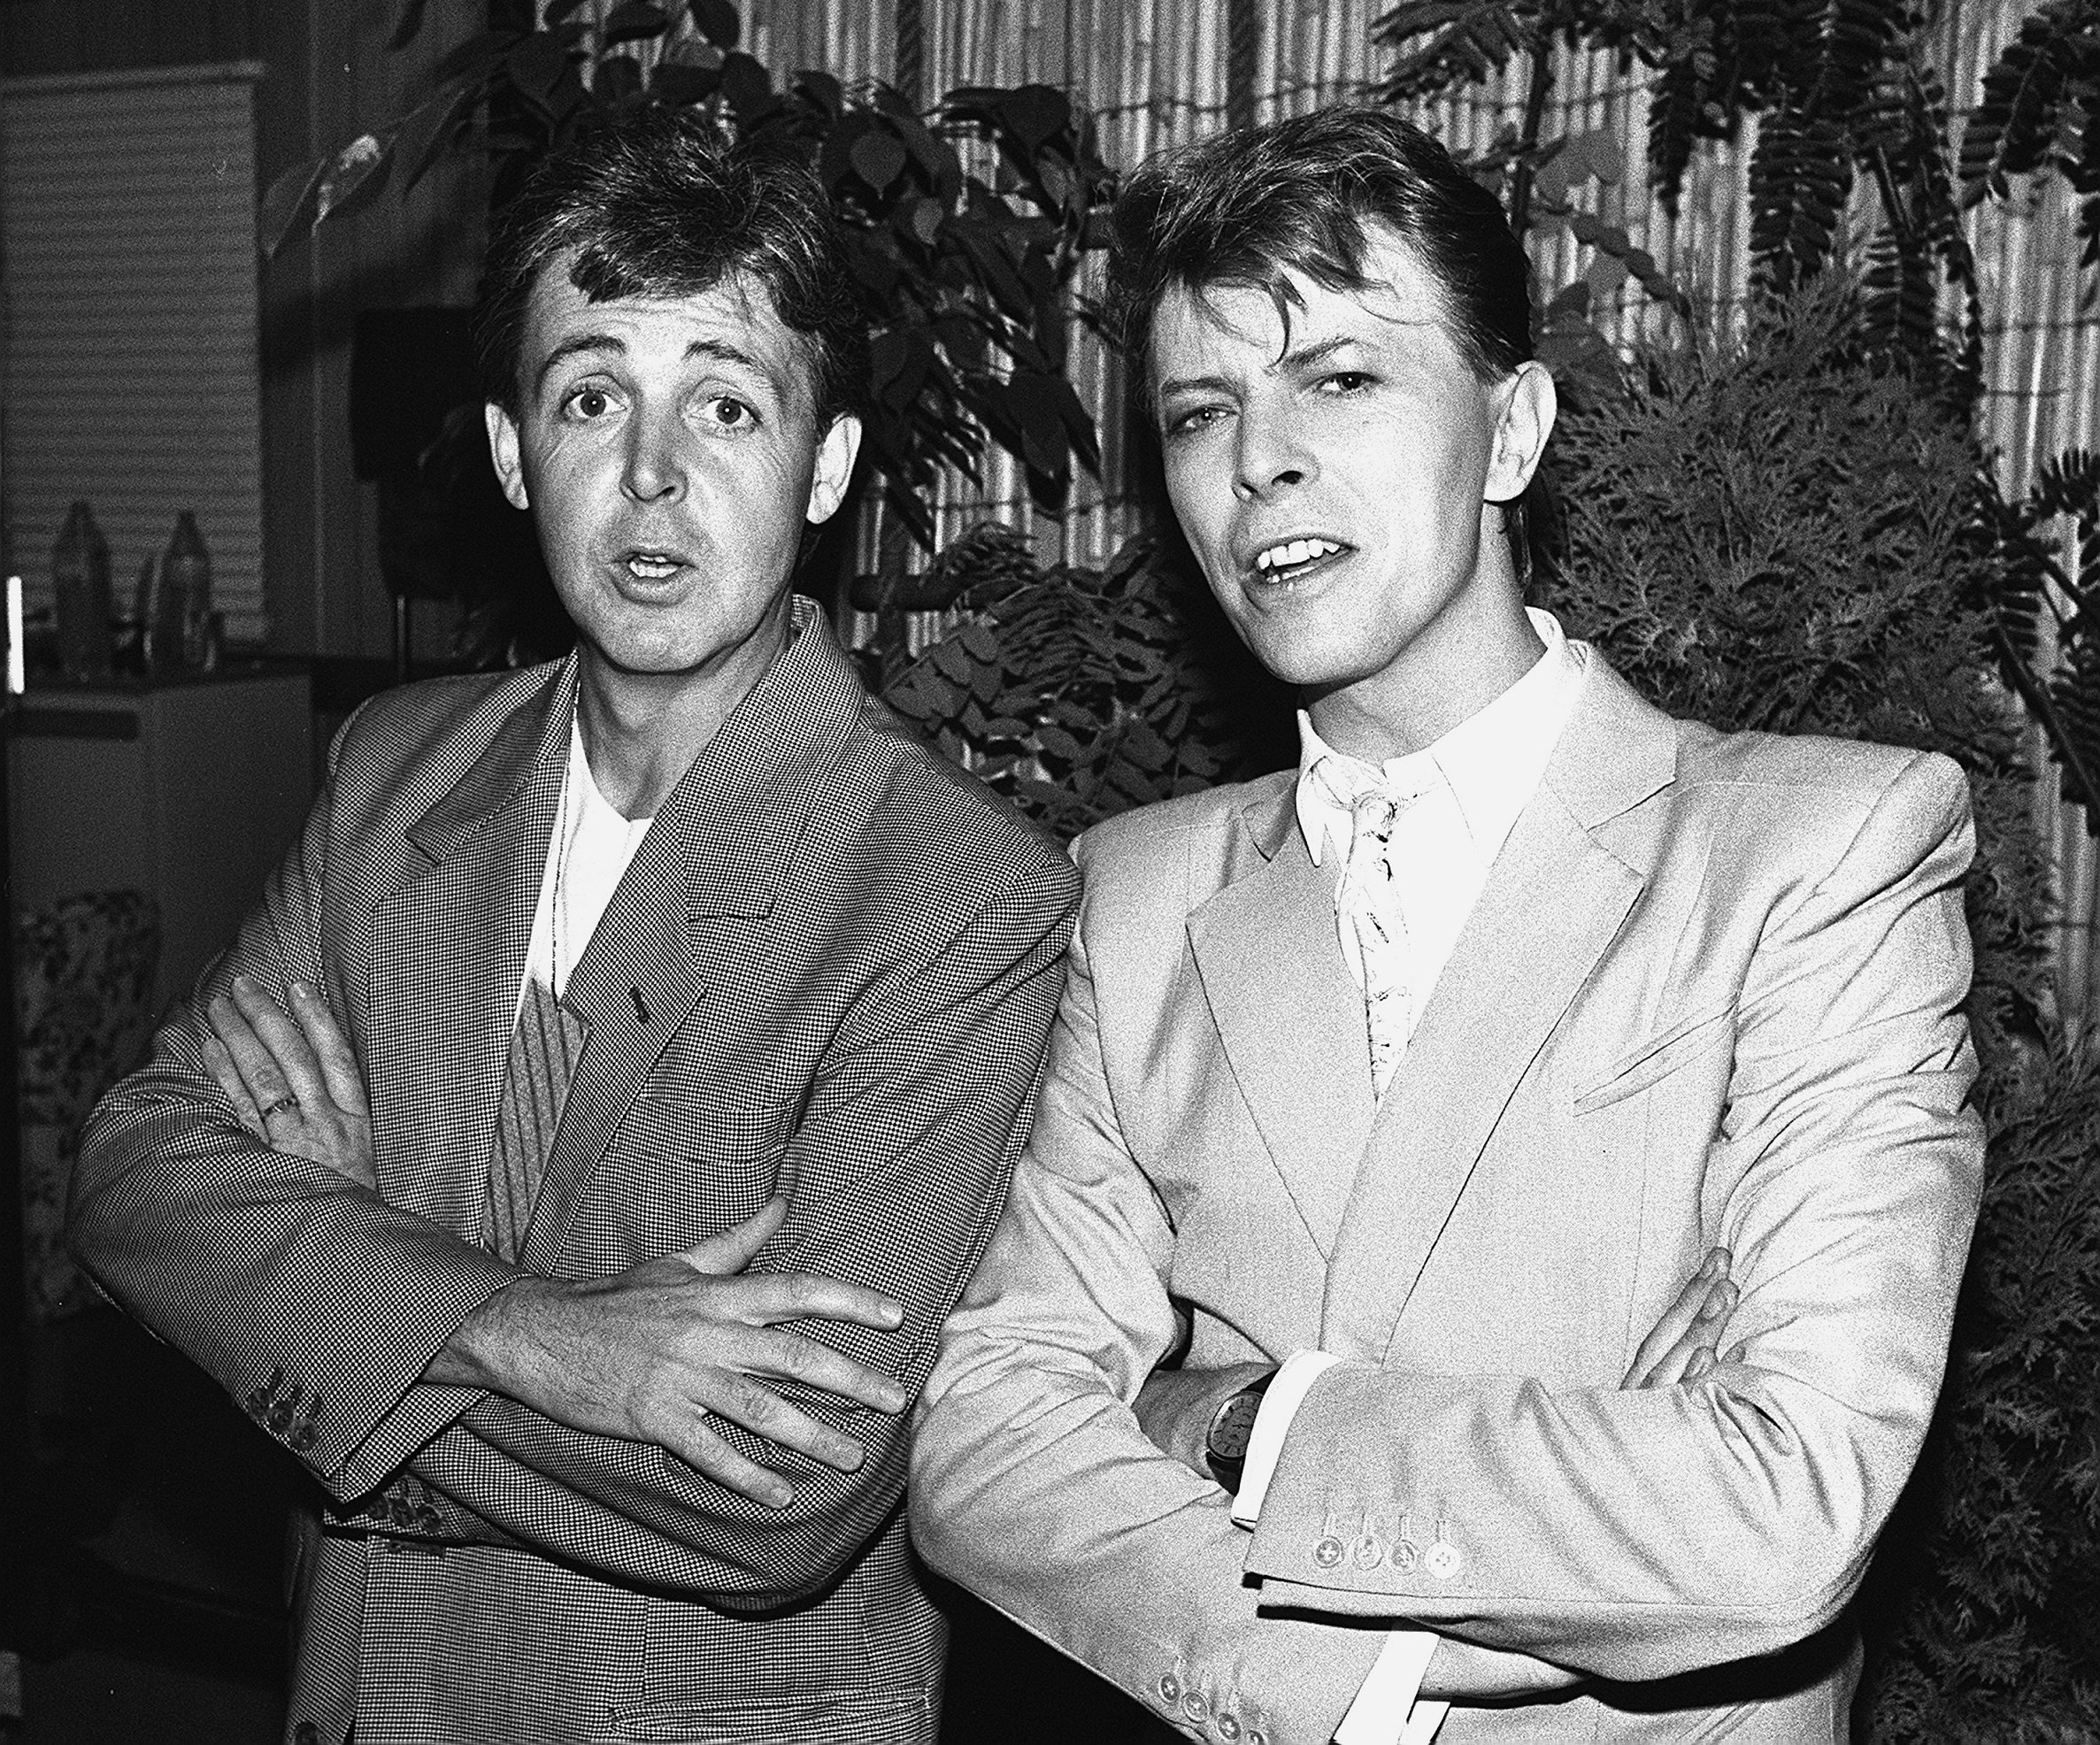 Paul McCartney and David Bowie wearing suits